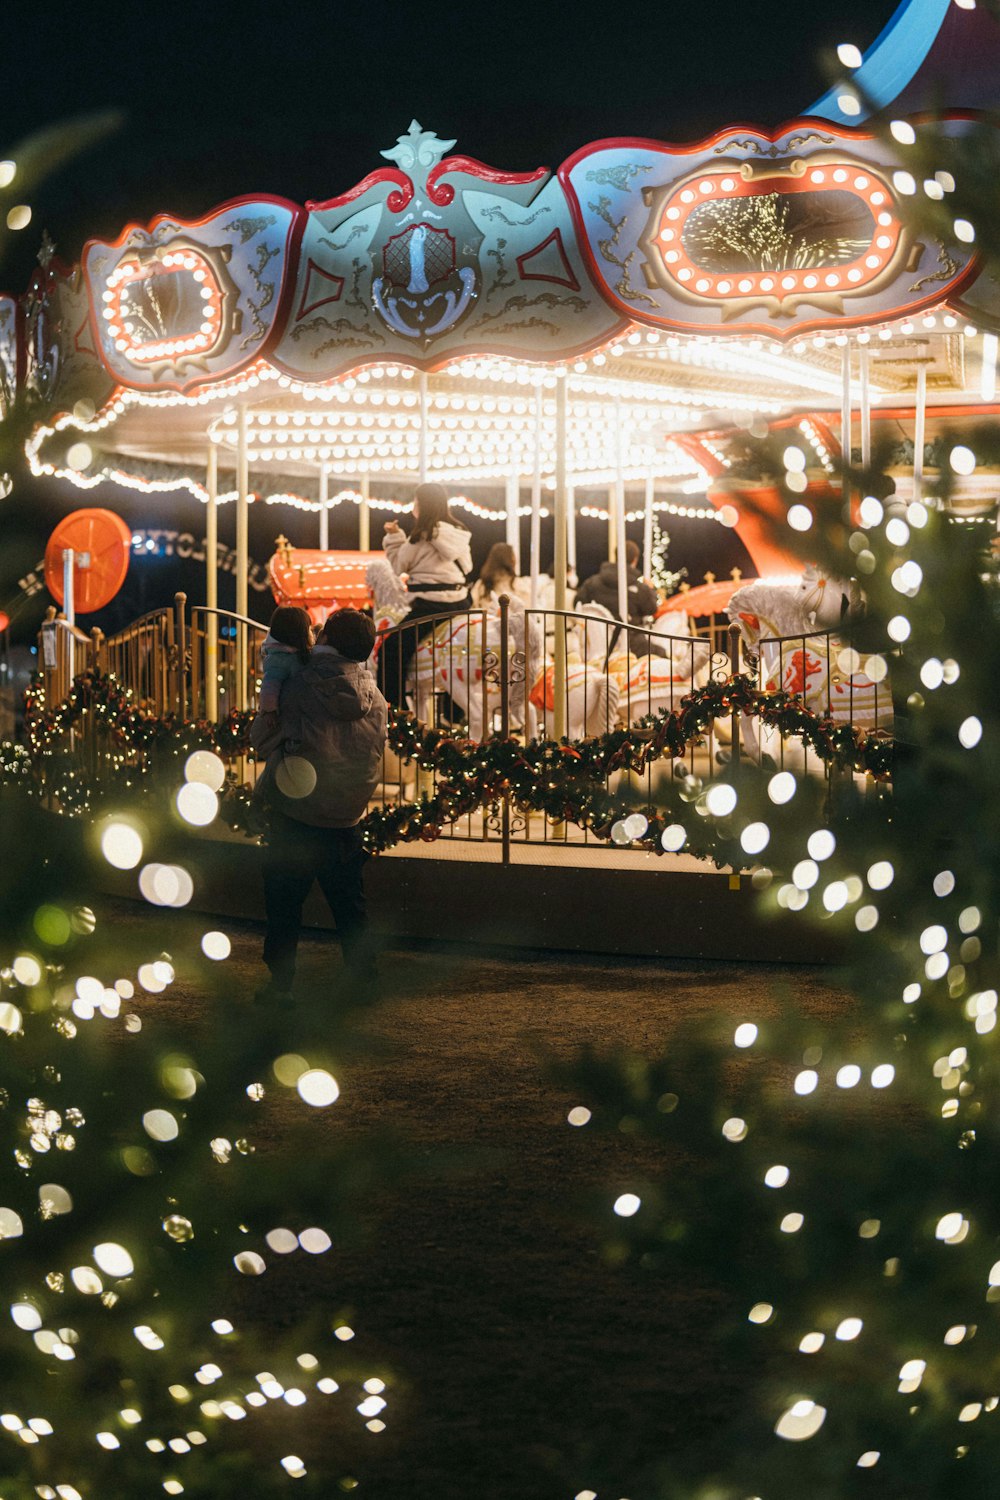 a merry go round at night with people walking around